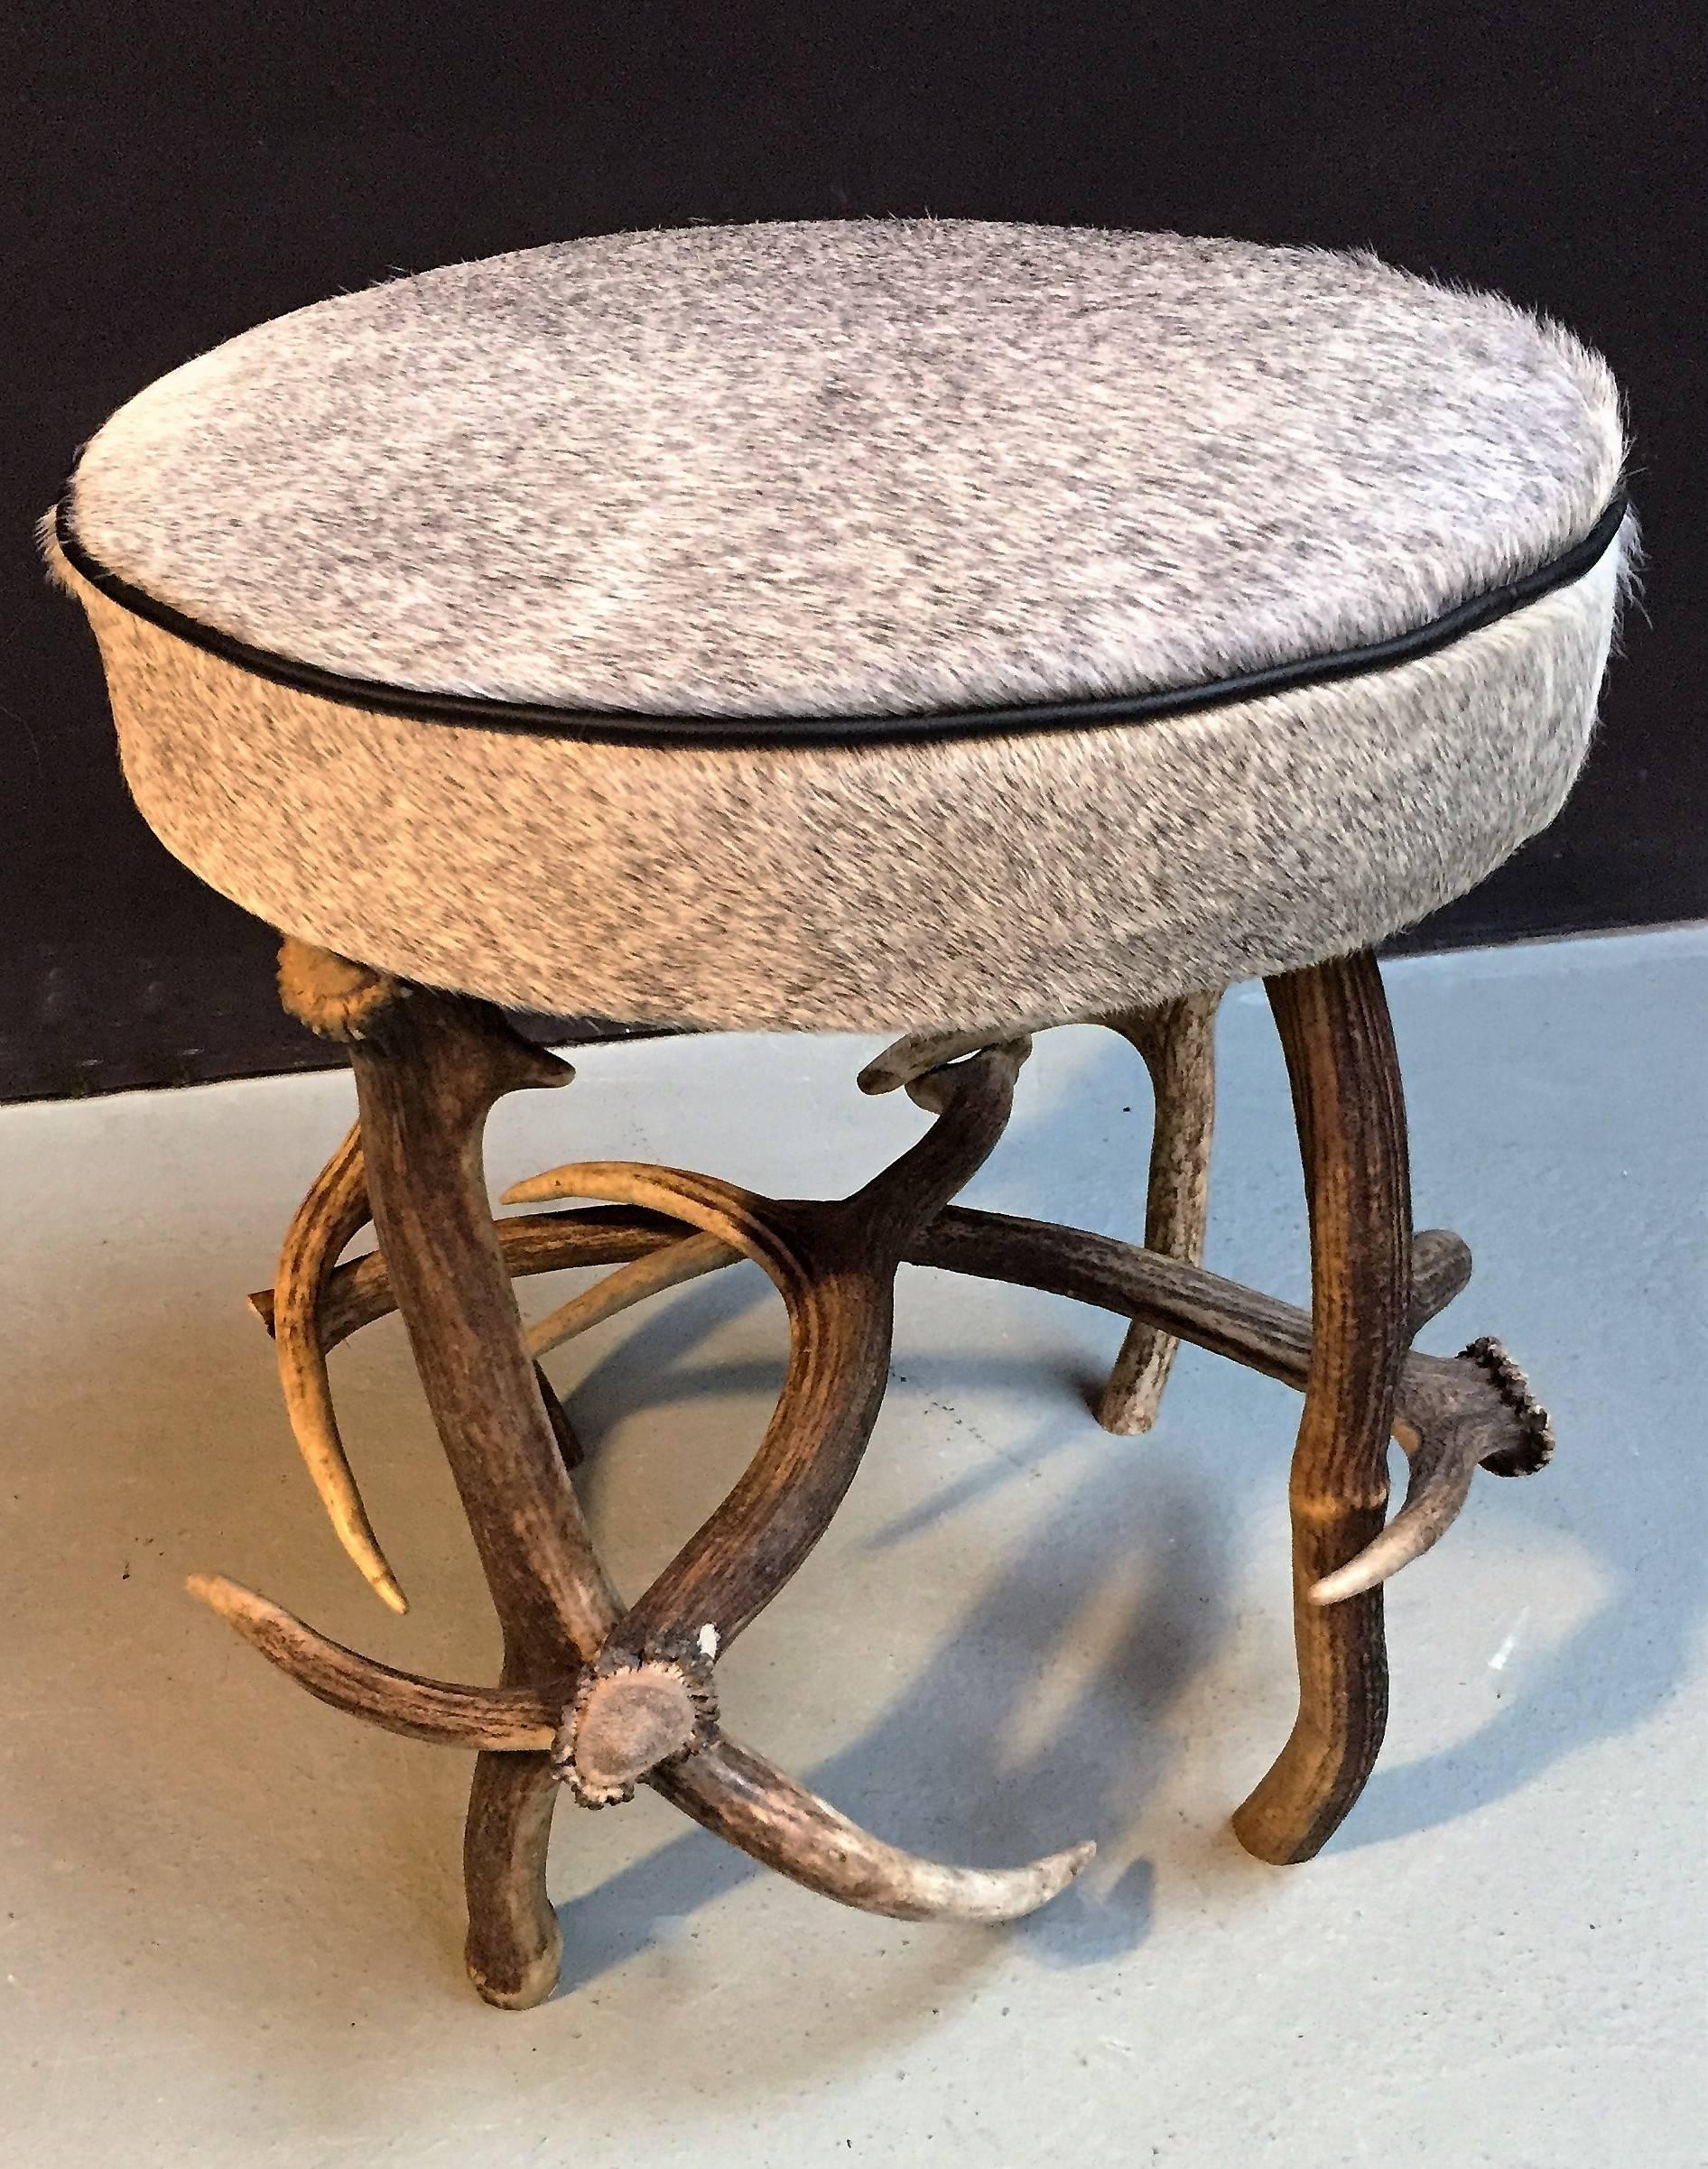 Antler stool made of red deer antlers with an exclusive grey Ecuadorian cowhide. Trimmed with black lining.
 